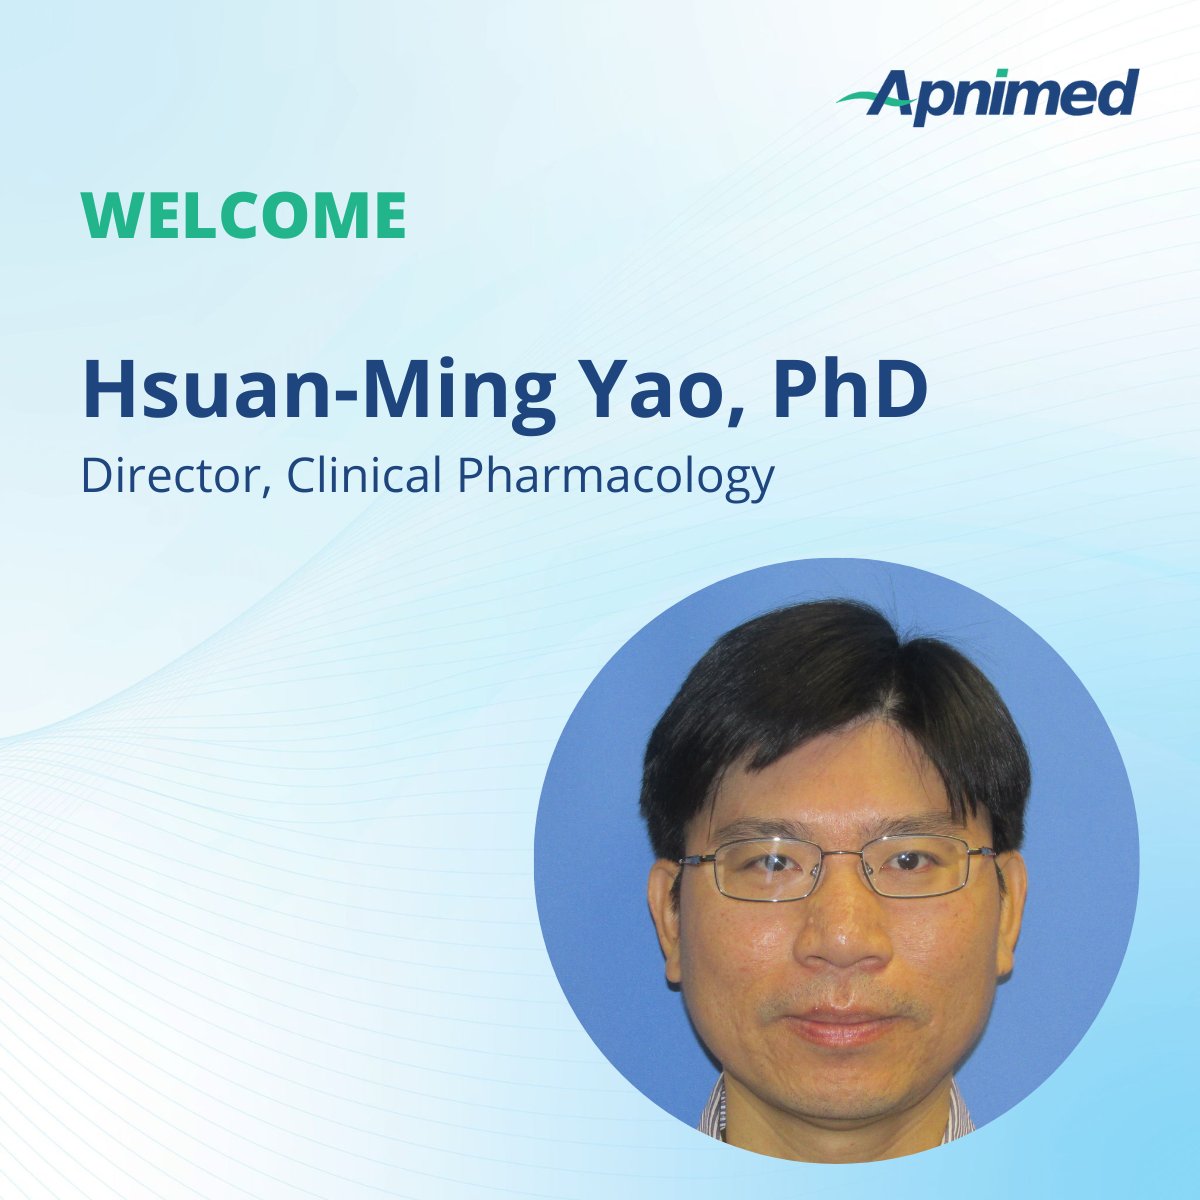 Hsuan-Ming Yao, PhD joins Apnimed as Director, Clinical Pharmacology. He’ll lead the design, implementation & interpretation of #ClinicalPharmacology studies that will support the development & regulatory approval of new #sleepdisorder therapies.

#Welcome Hsuan-Ming!

#newjob